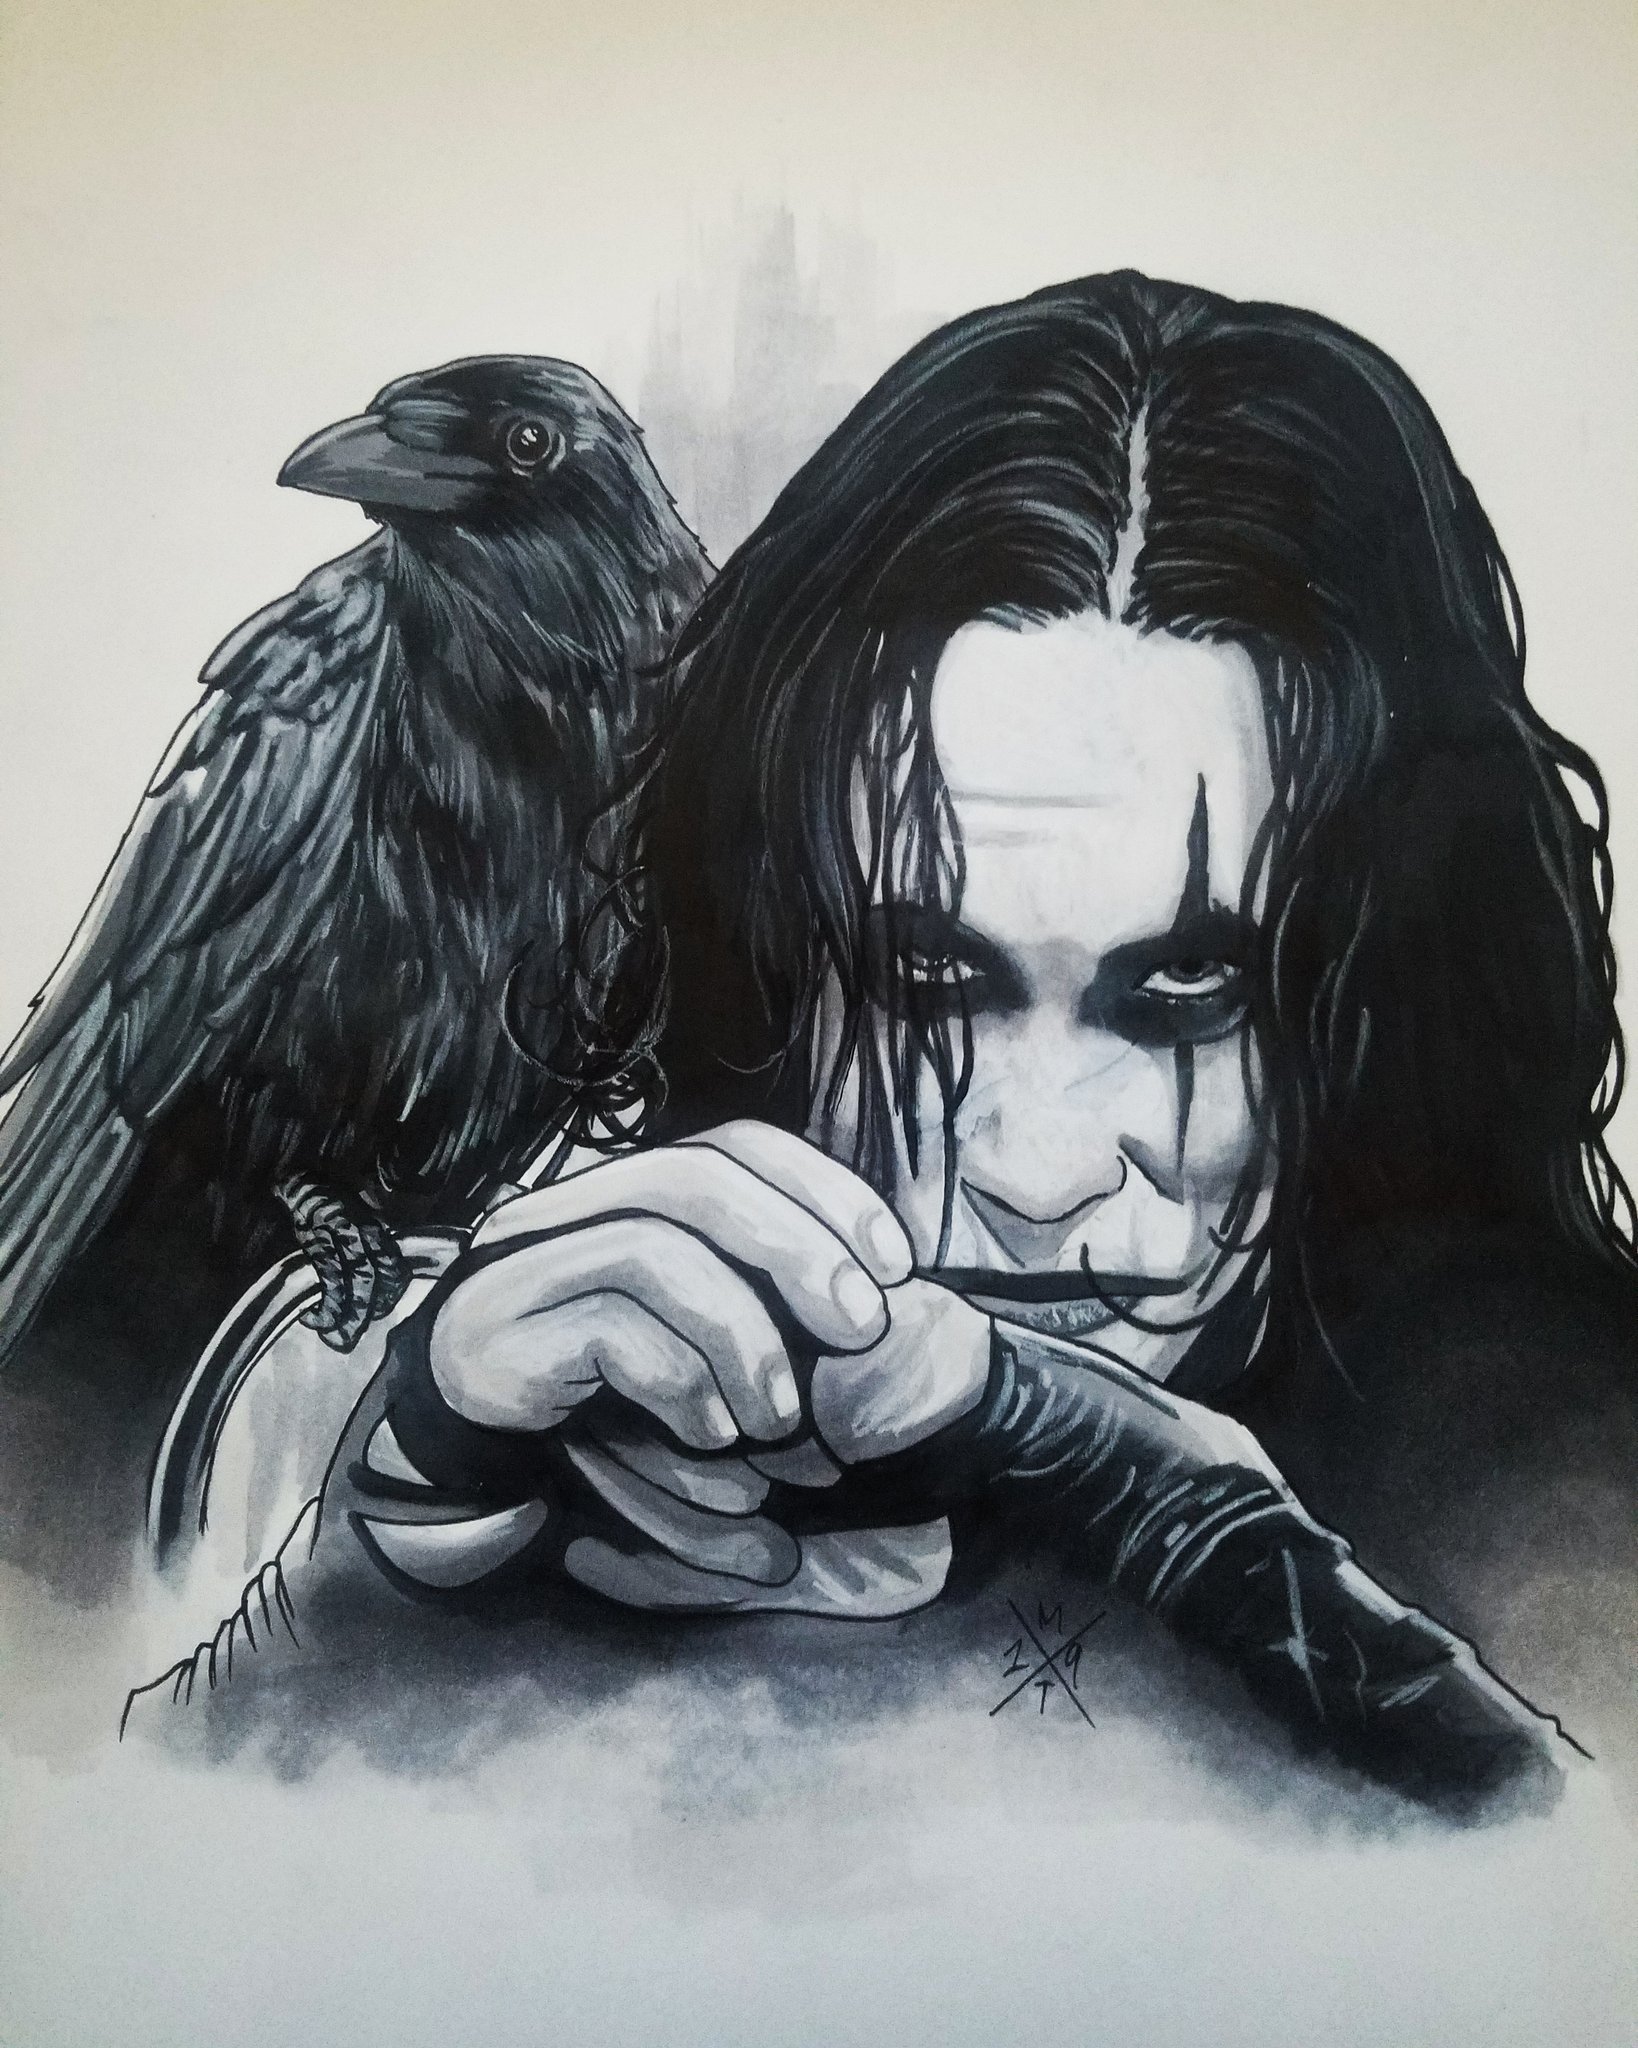 just finished up my Brandon LeeThe Crow tribute piece Dustin Charles at  Ritual Electric in Tulsa OK  rnerdtattoos